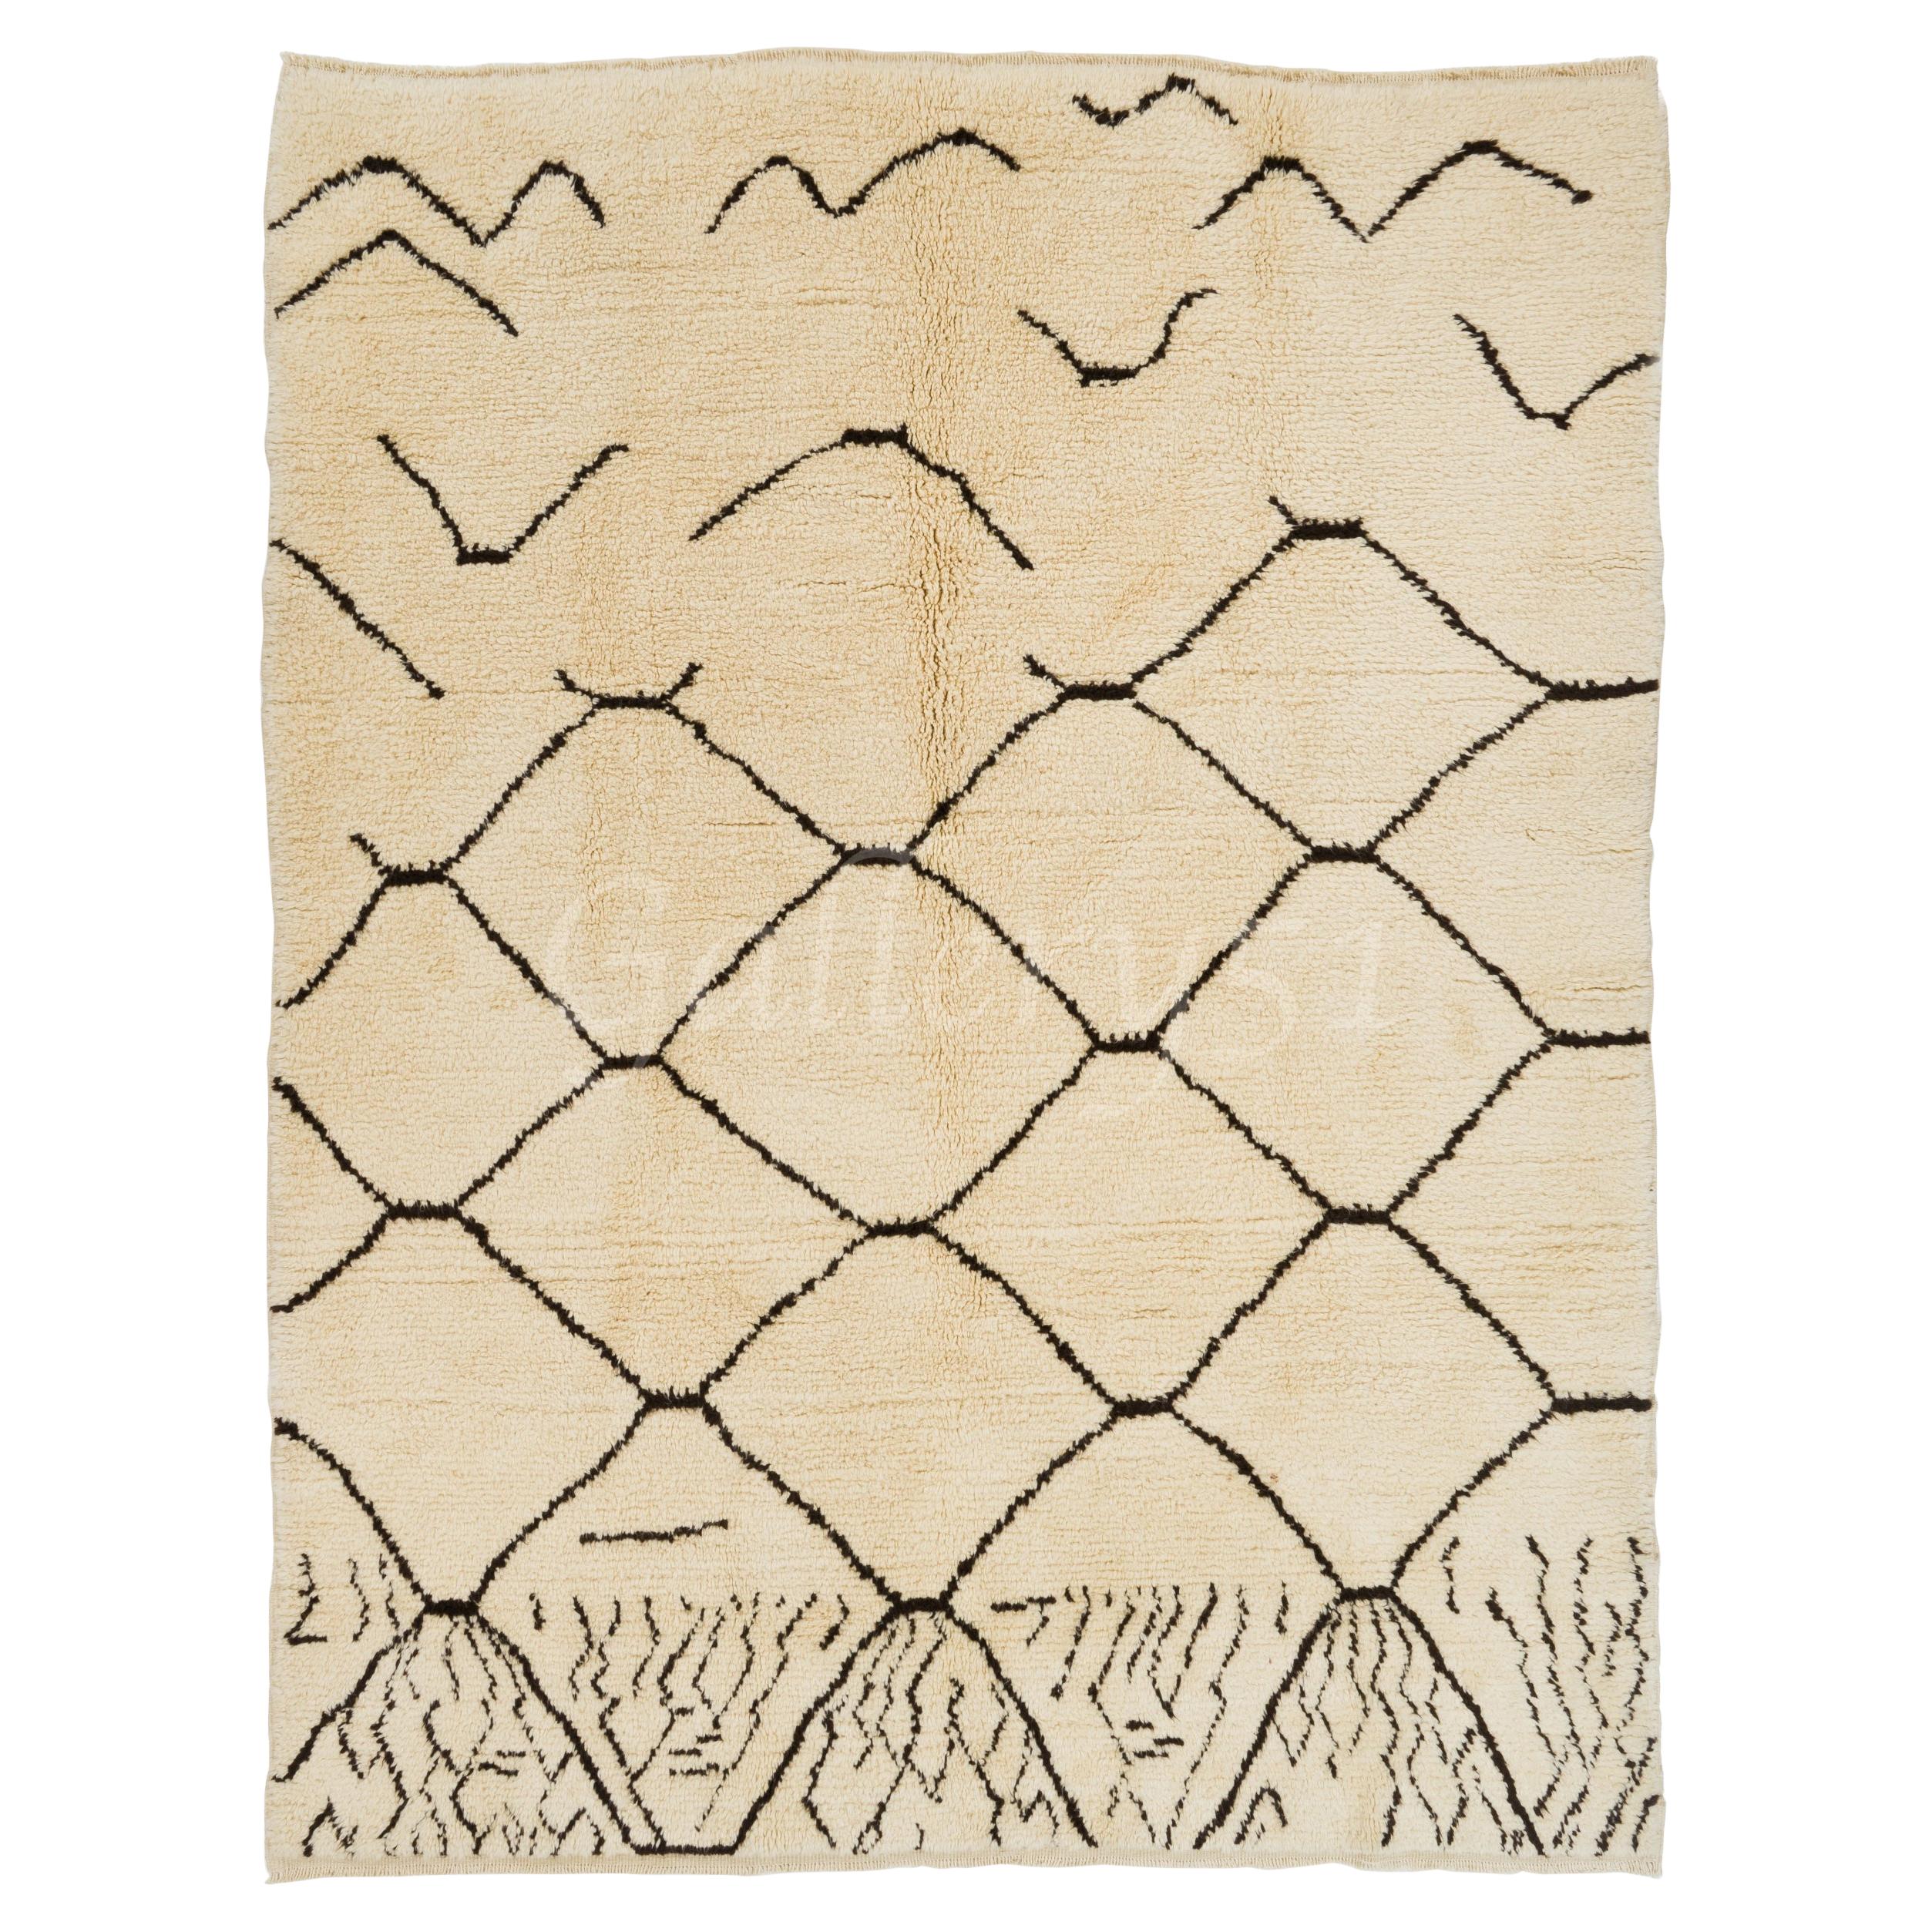 10x14 ft Contemporary Moroccan Rug. 100% Natural Un-Dyed Wool, Custom Options Av For Sale